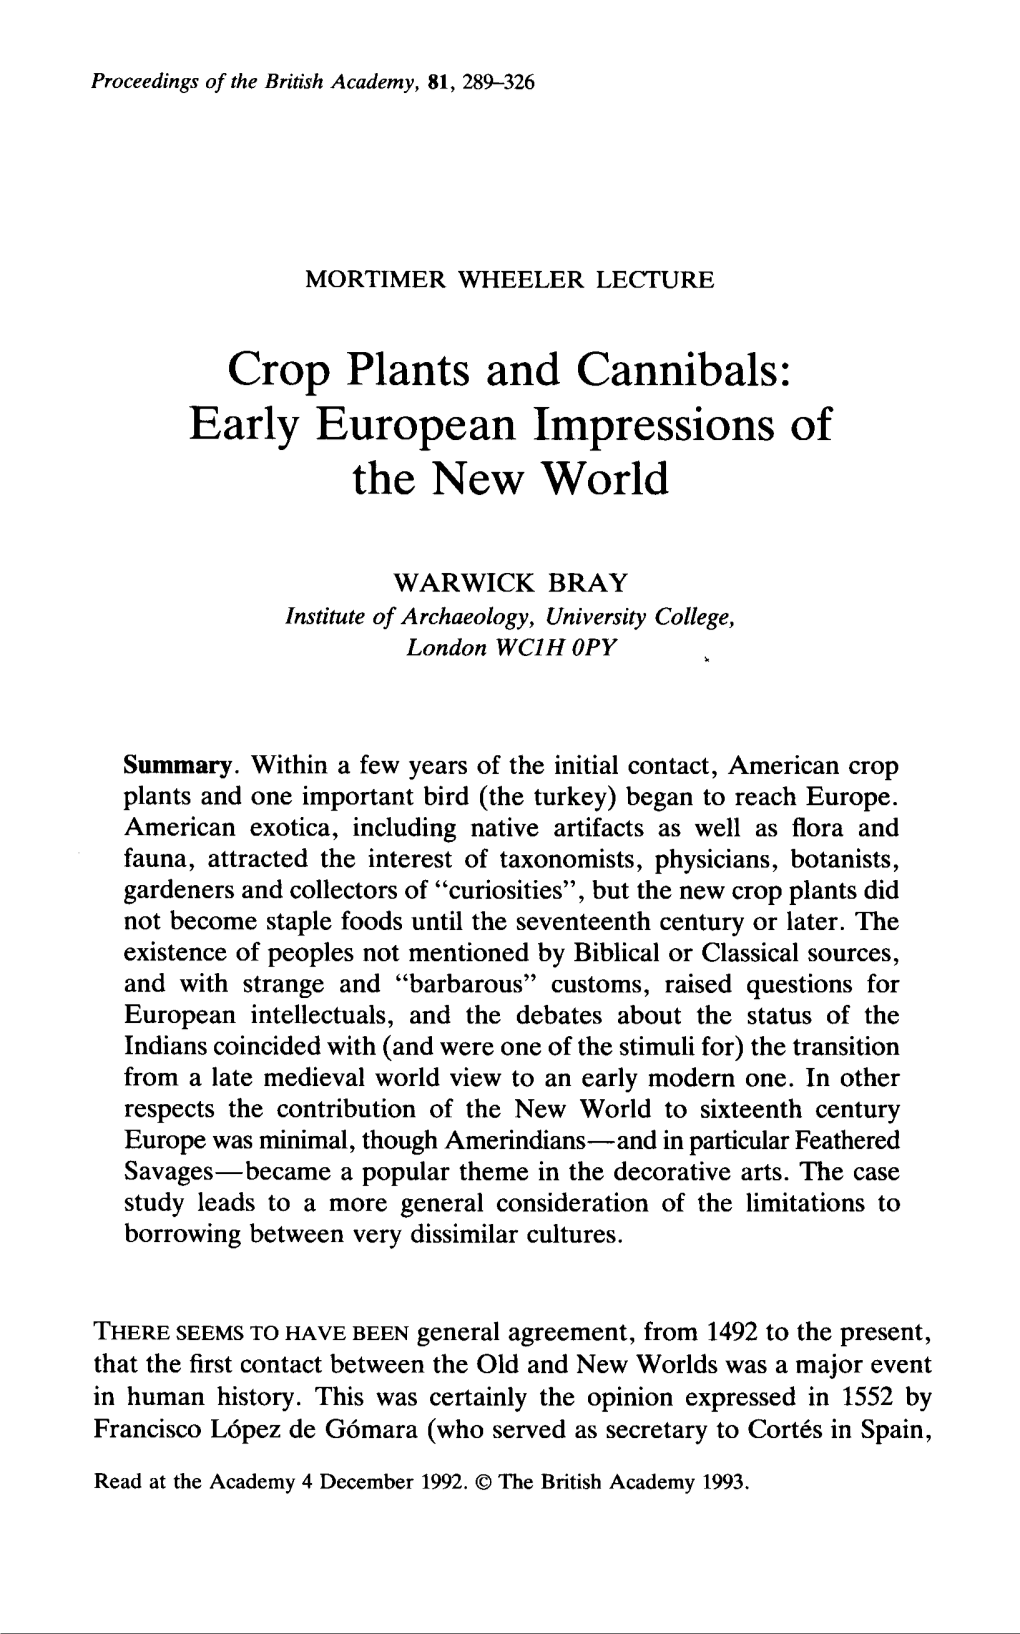 Crop Plants and Cannibals: Early European Impressions of the New World